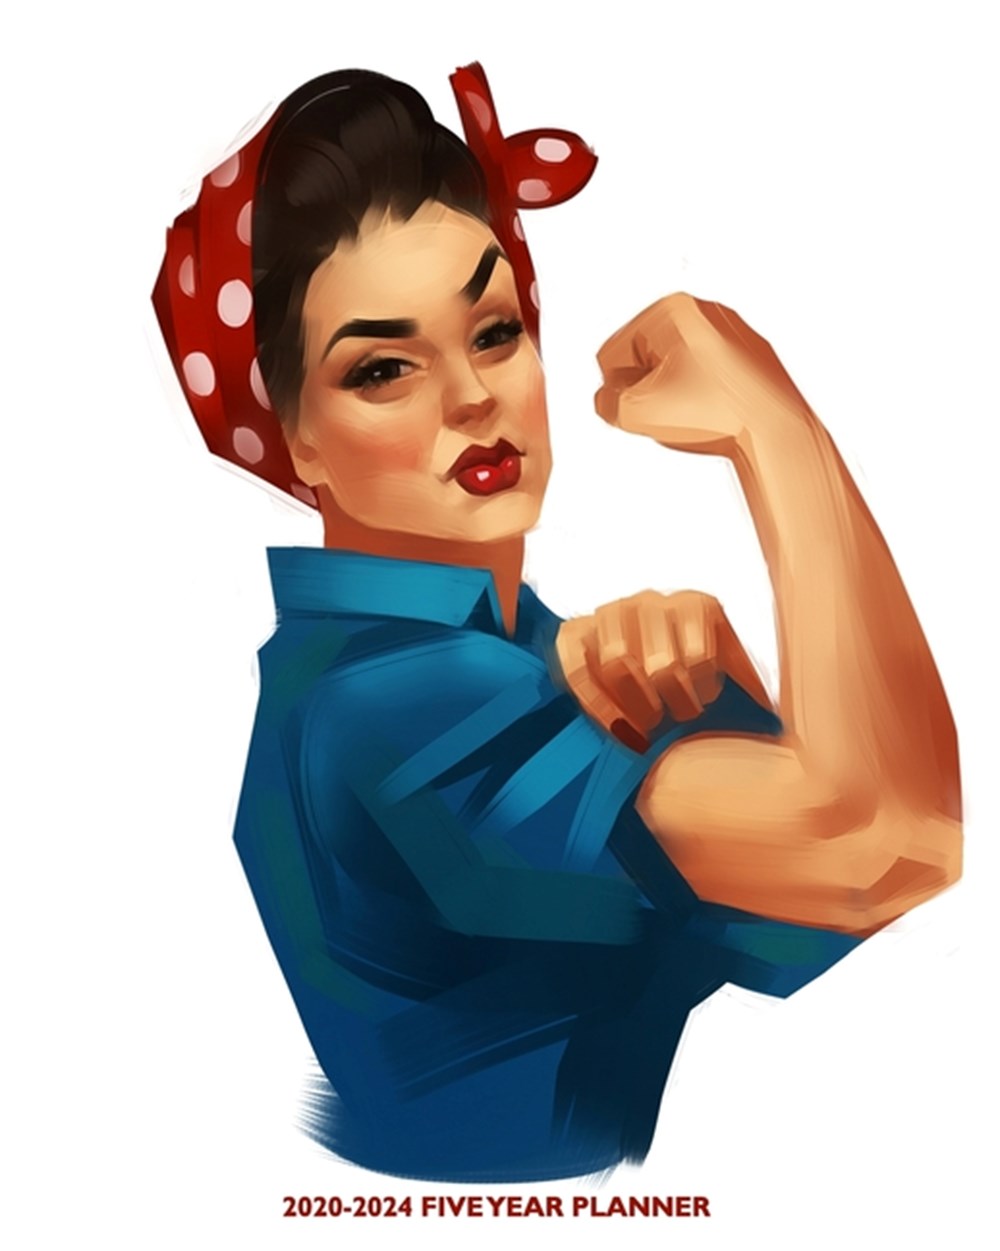 2020-2024 Five Year Planner Rosie the Riveter Female Empowerment - Strong Women - 60 Month Calendar 